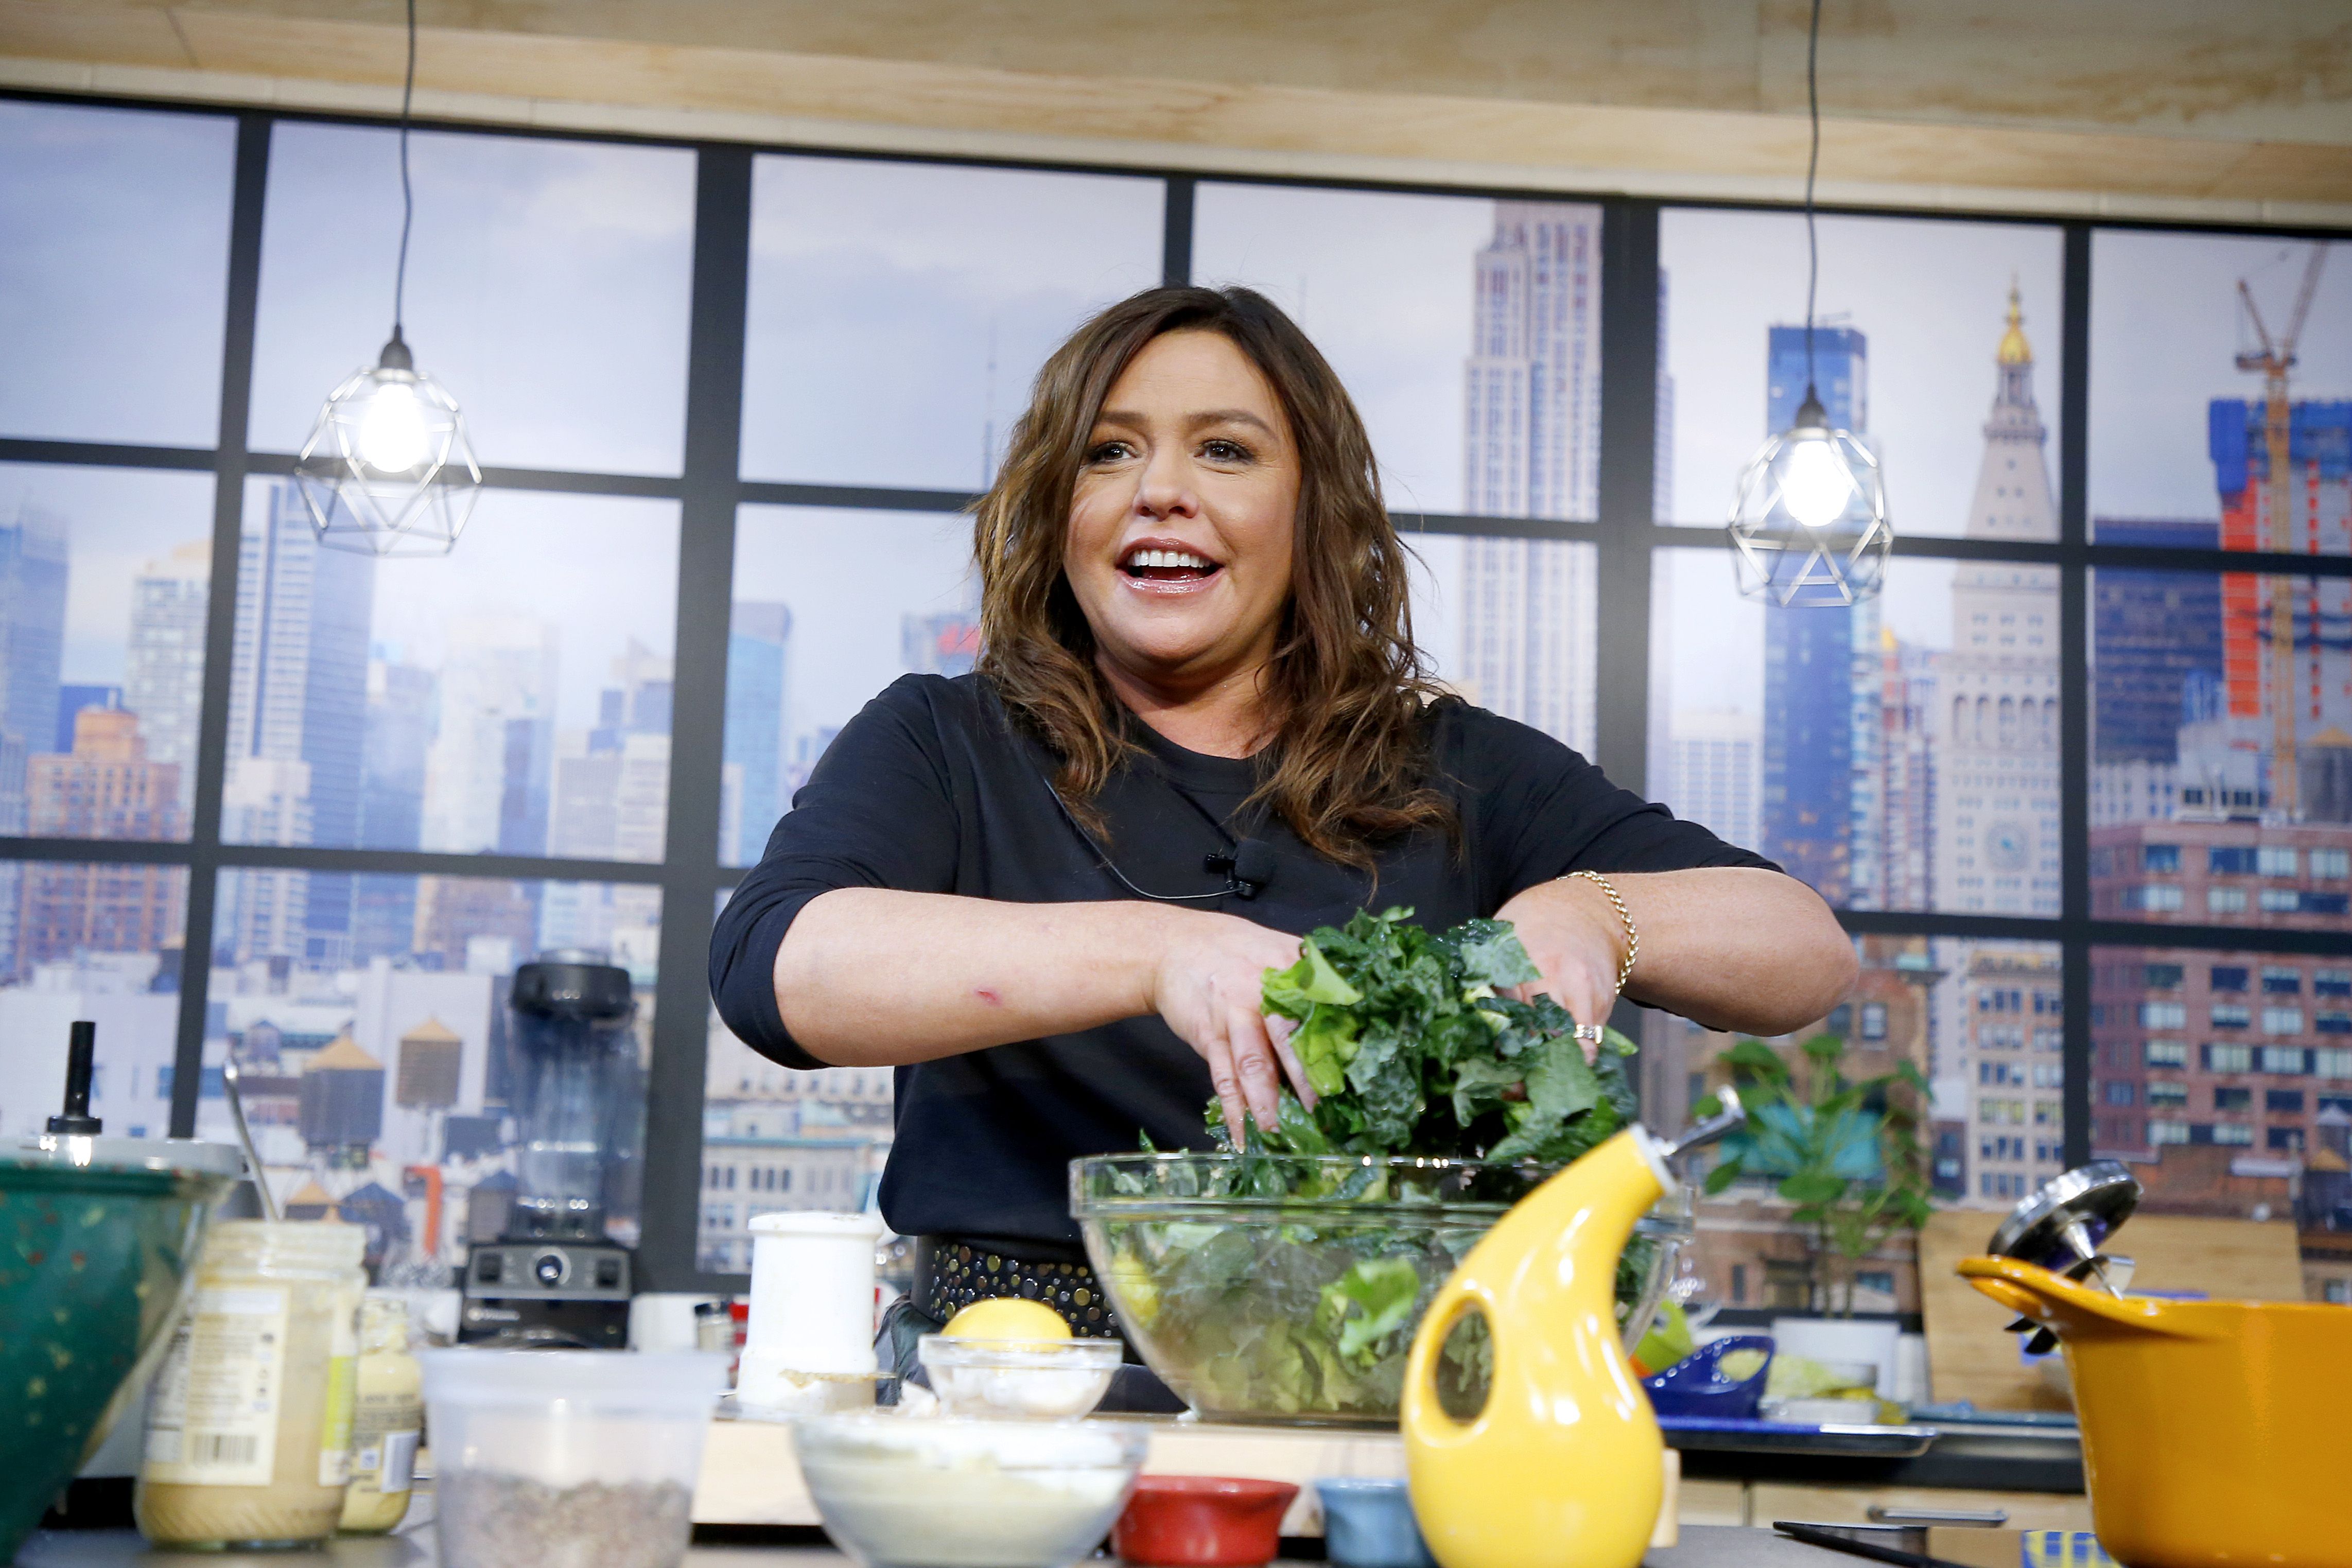 https://hips.hearstapps.com/hmg-prod/images/chef-rachael-ray-onstage-during-a-culinary-demonstration-at-news-photo-1686691994.jpg